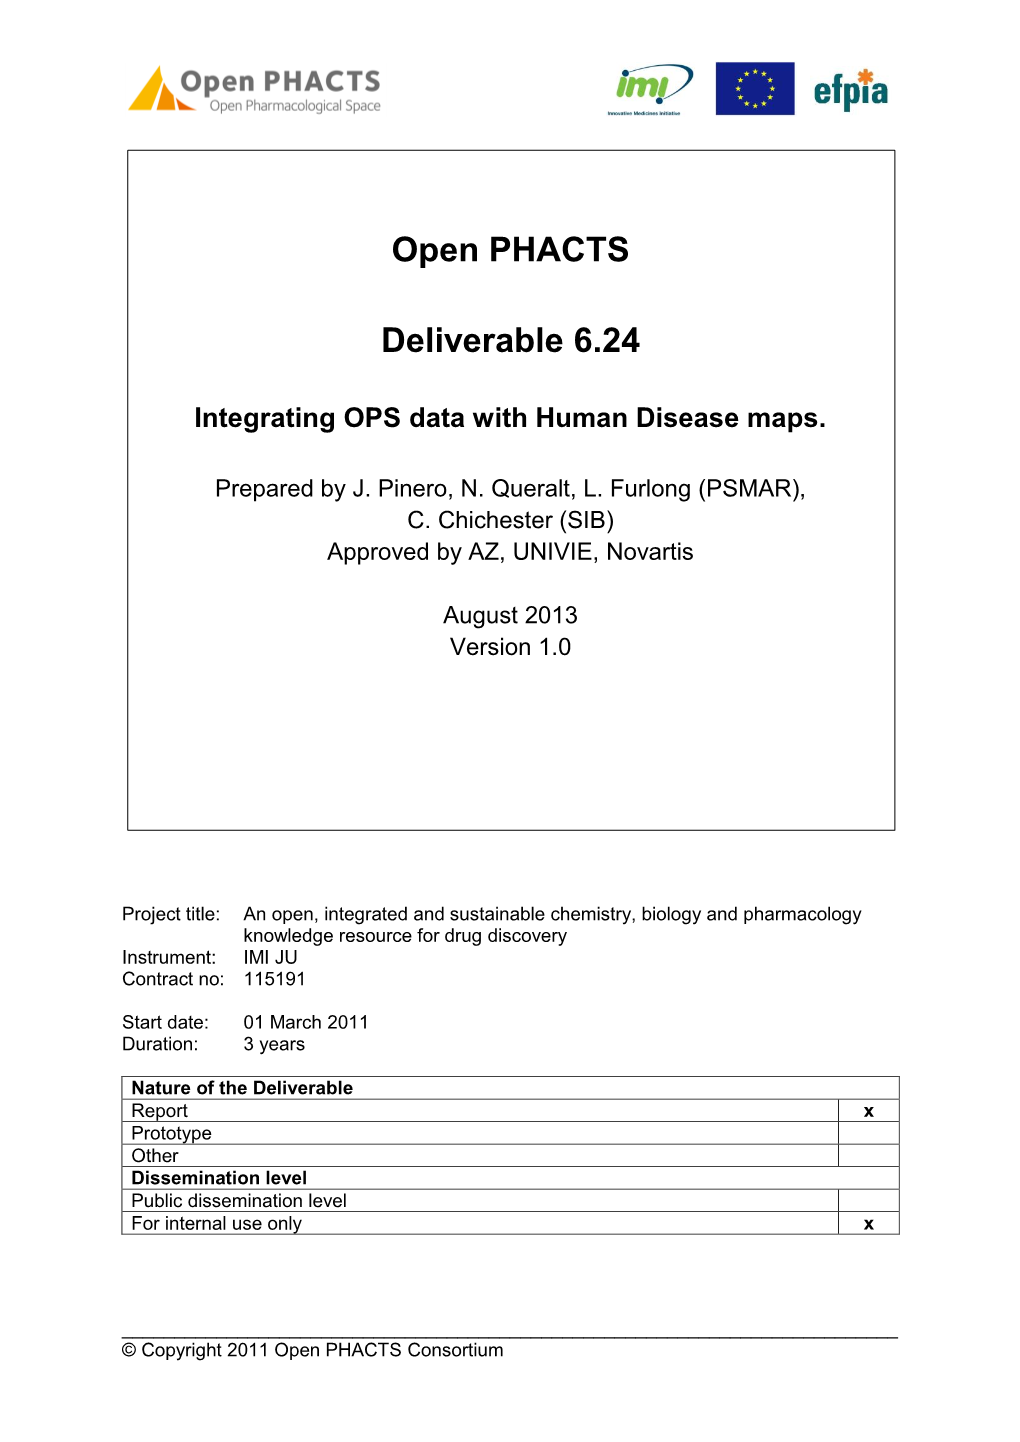 Open PHACTS Deliverable 6.24 Integrating OPS Data with Human